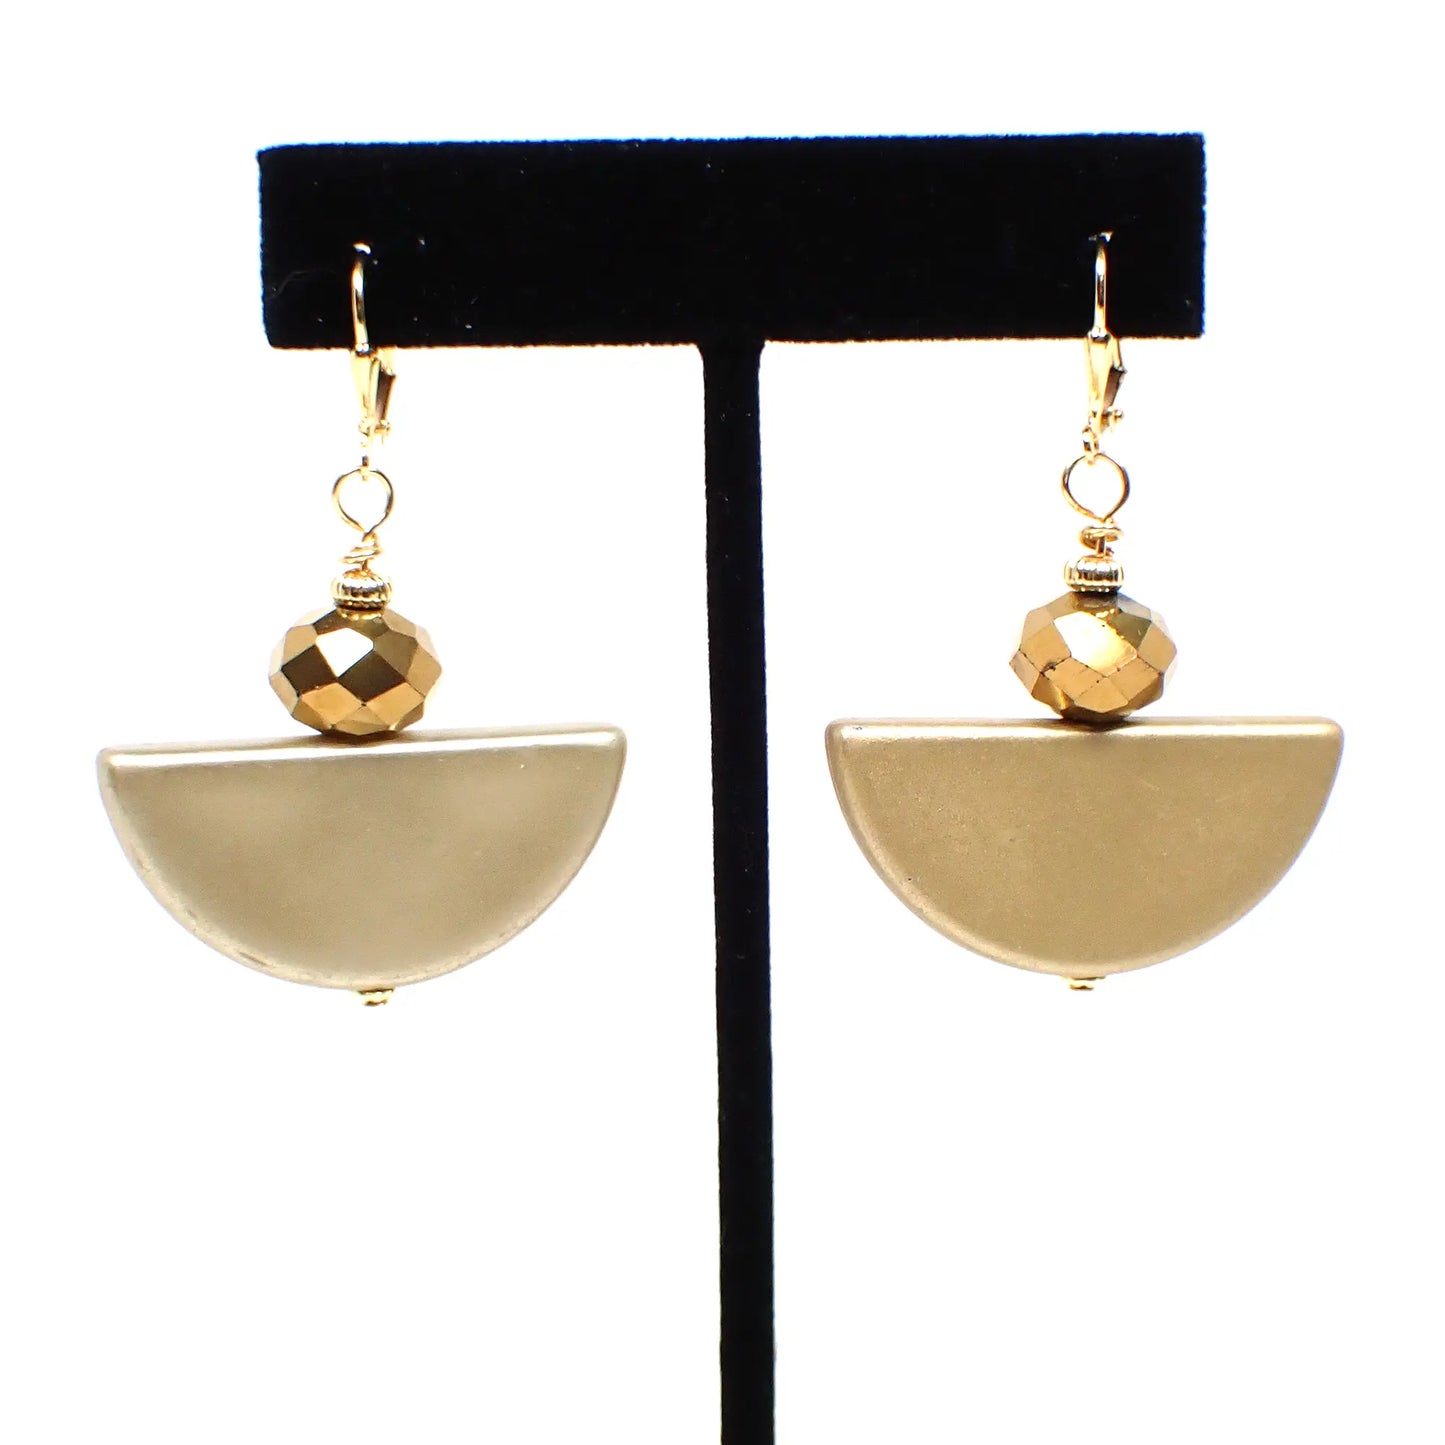 Antiqued Metallic Gold Color Handmade Half Moon Earrings Gold Plated Hook Lever Back or Clip On